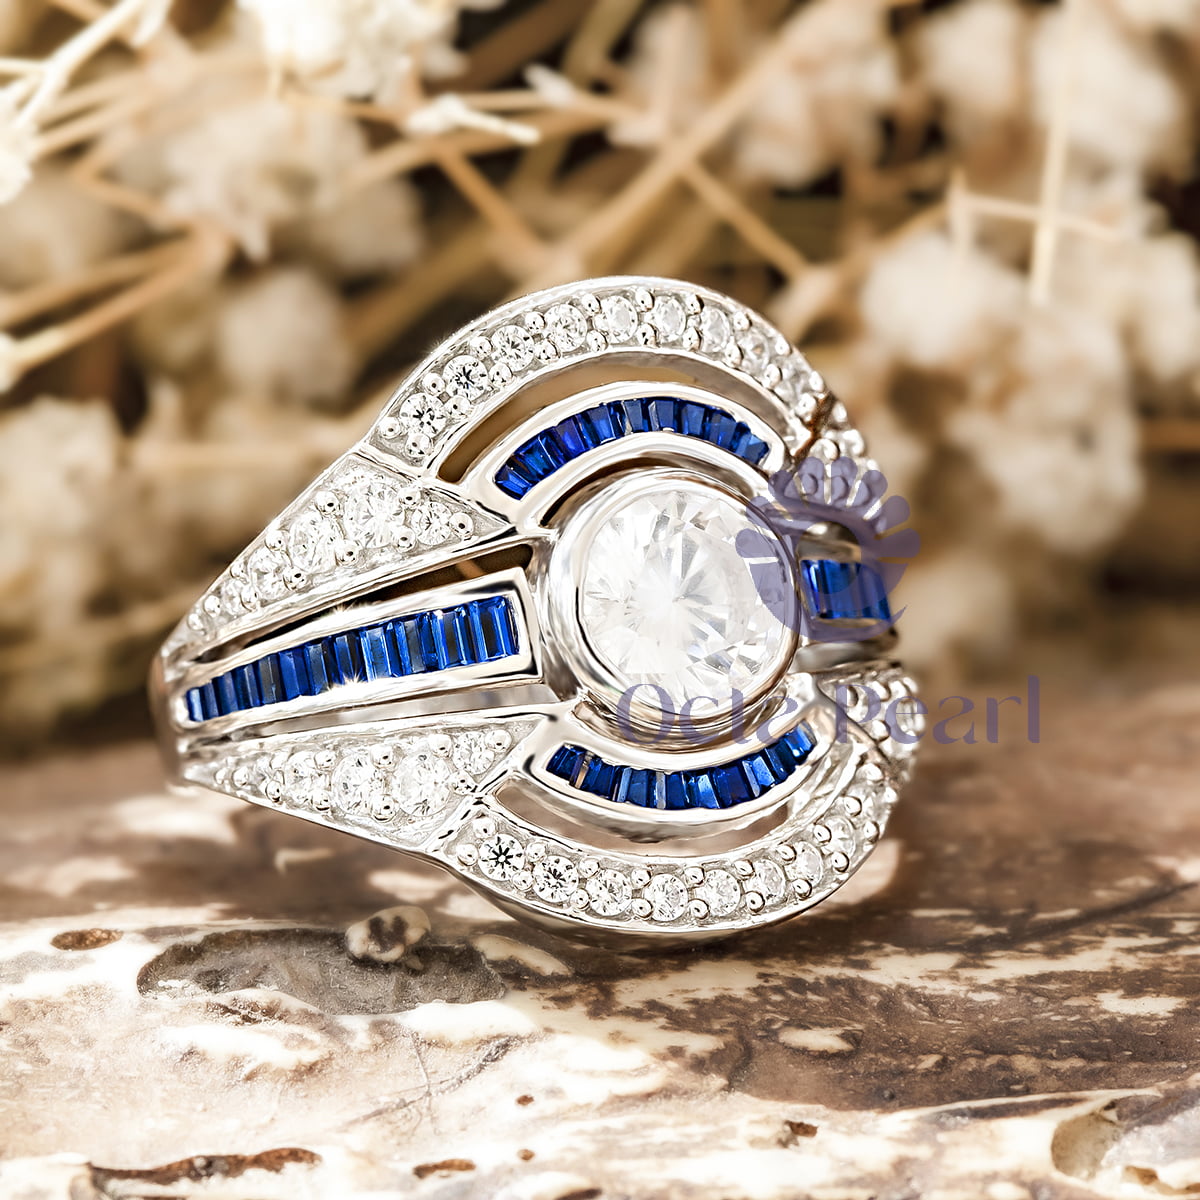 Antique Victorian-style Ring With Blue Sapphire